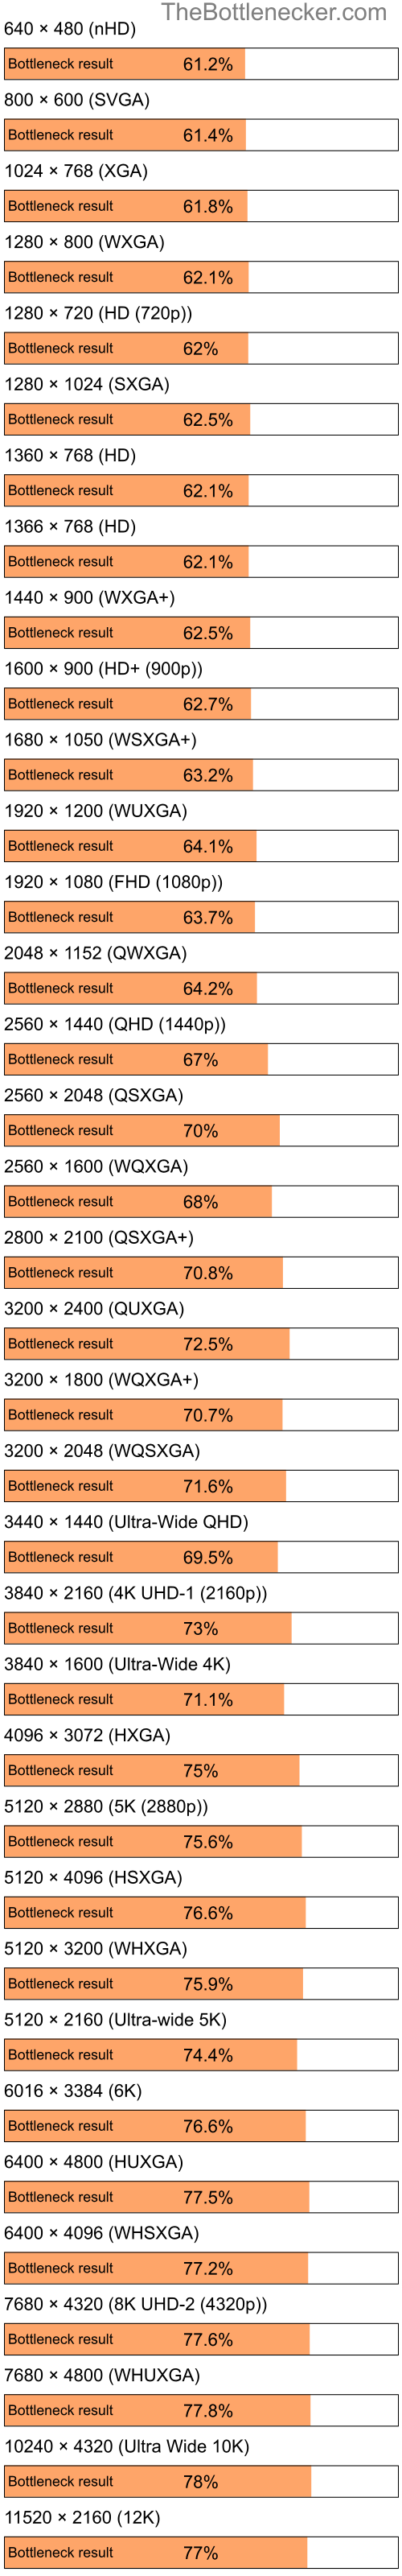 Bottleneck results by resolution for Intel Celeron M 420 and NVIDIA Quadro FX 4400 in General Tasks